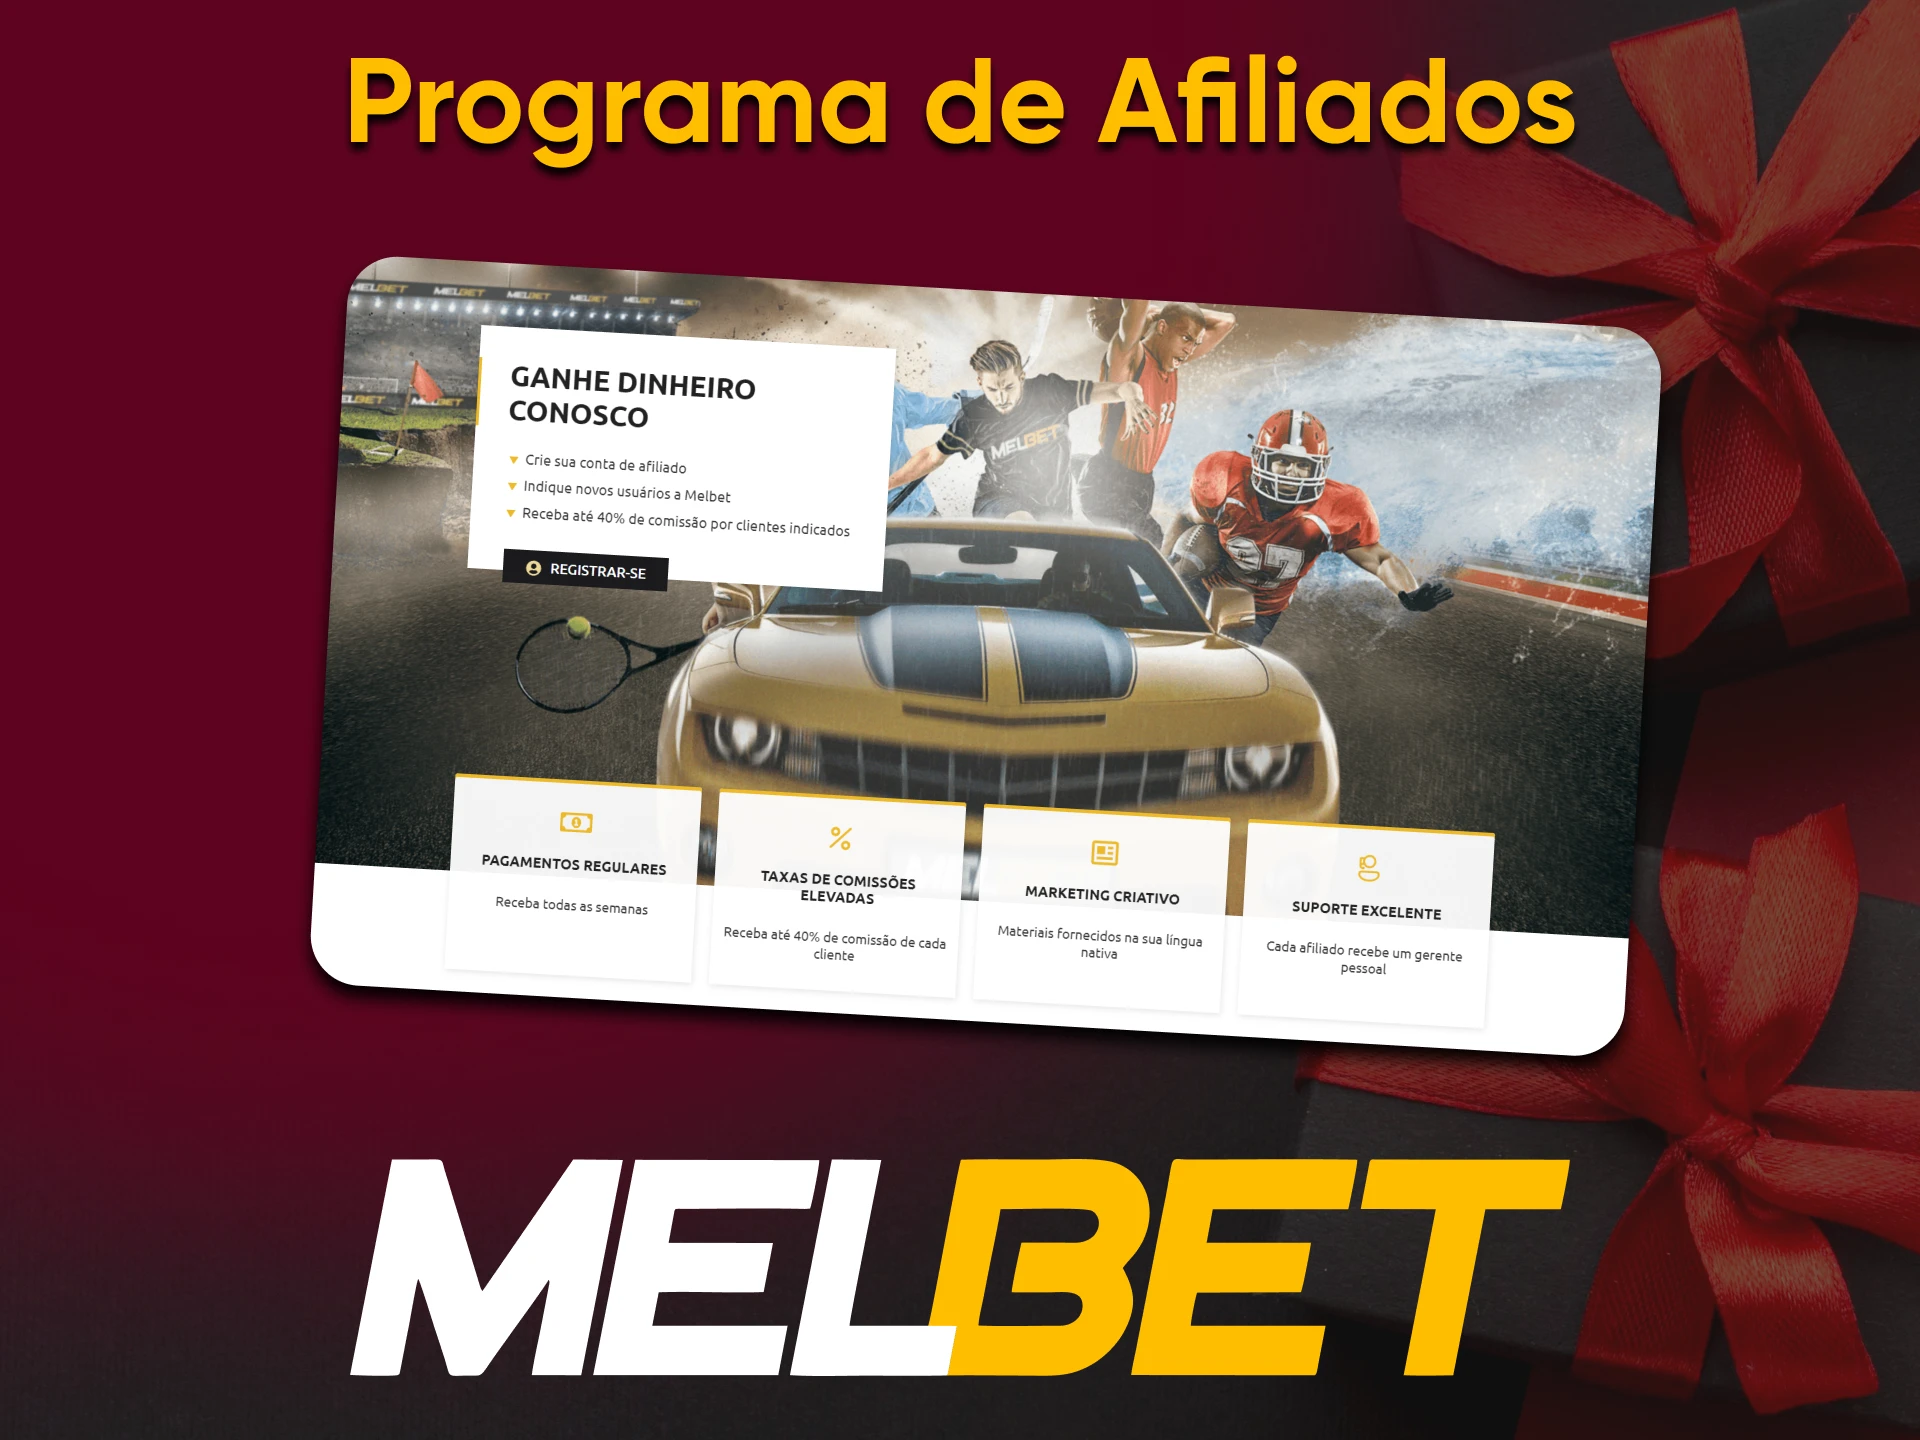 To increase your profit in the betting market, join the Melbet affiliate program.